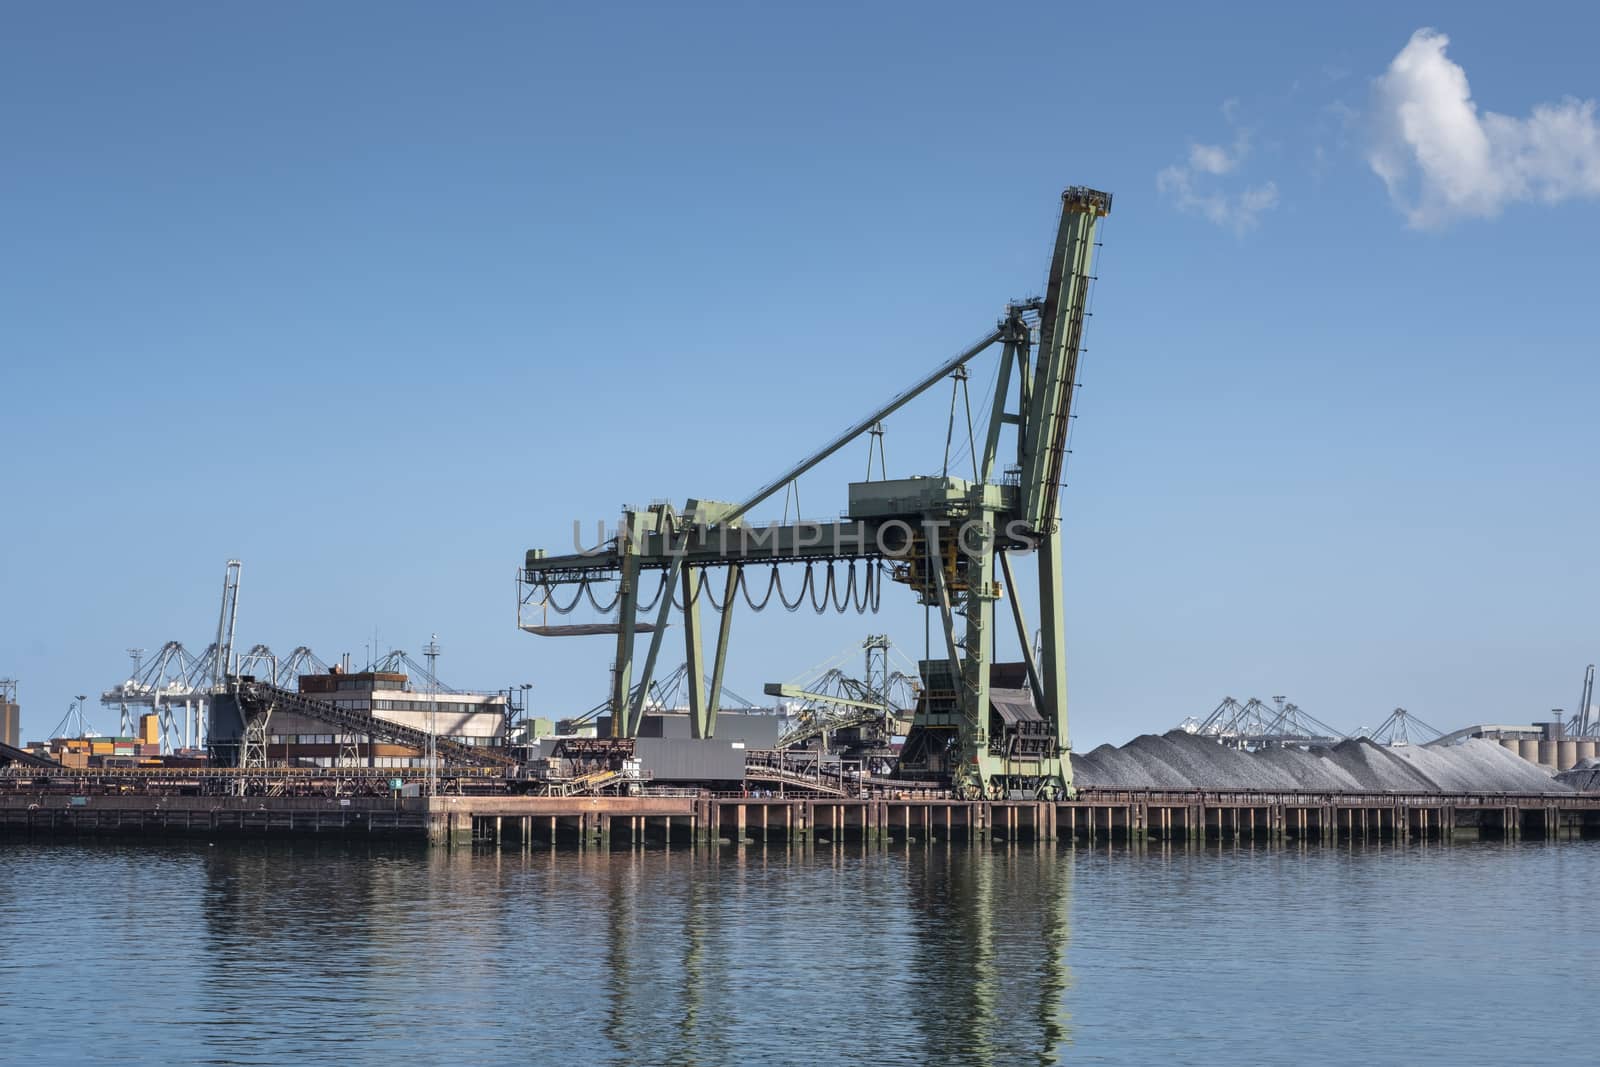 Type of cargo terminal and cranes, berths for transshipment of bulk cargo, iron ore and coal.